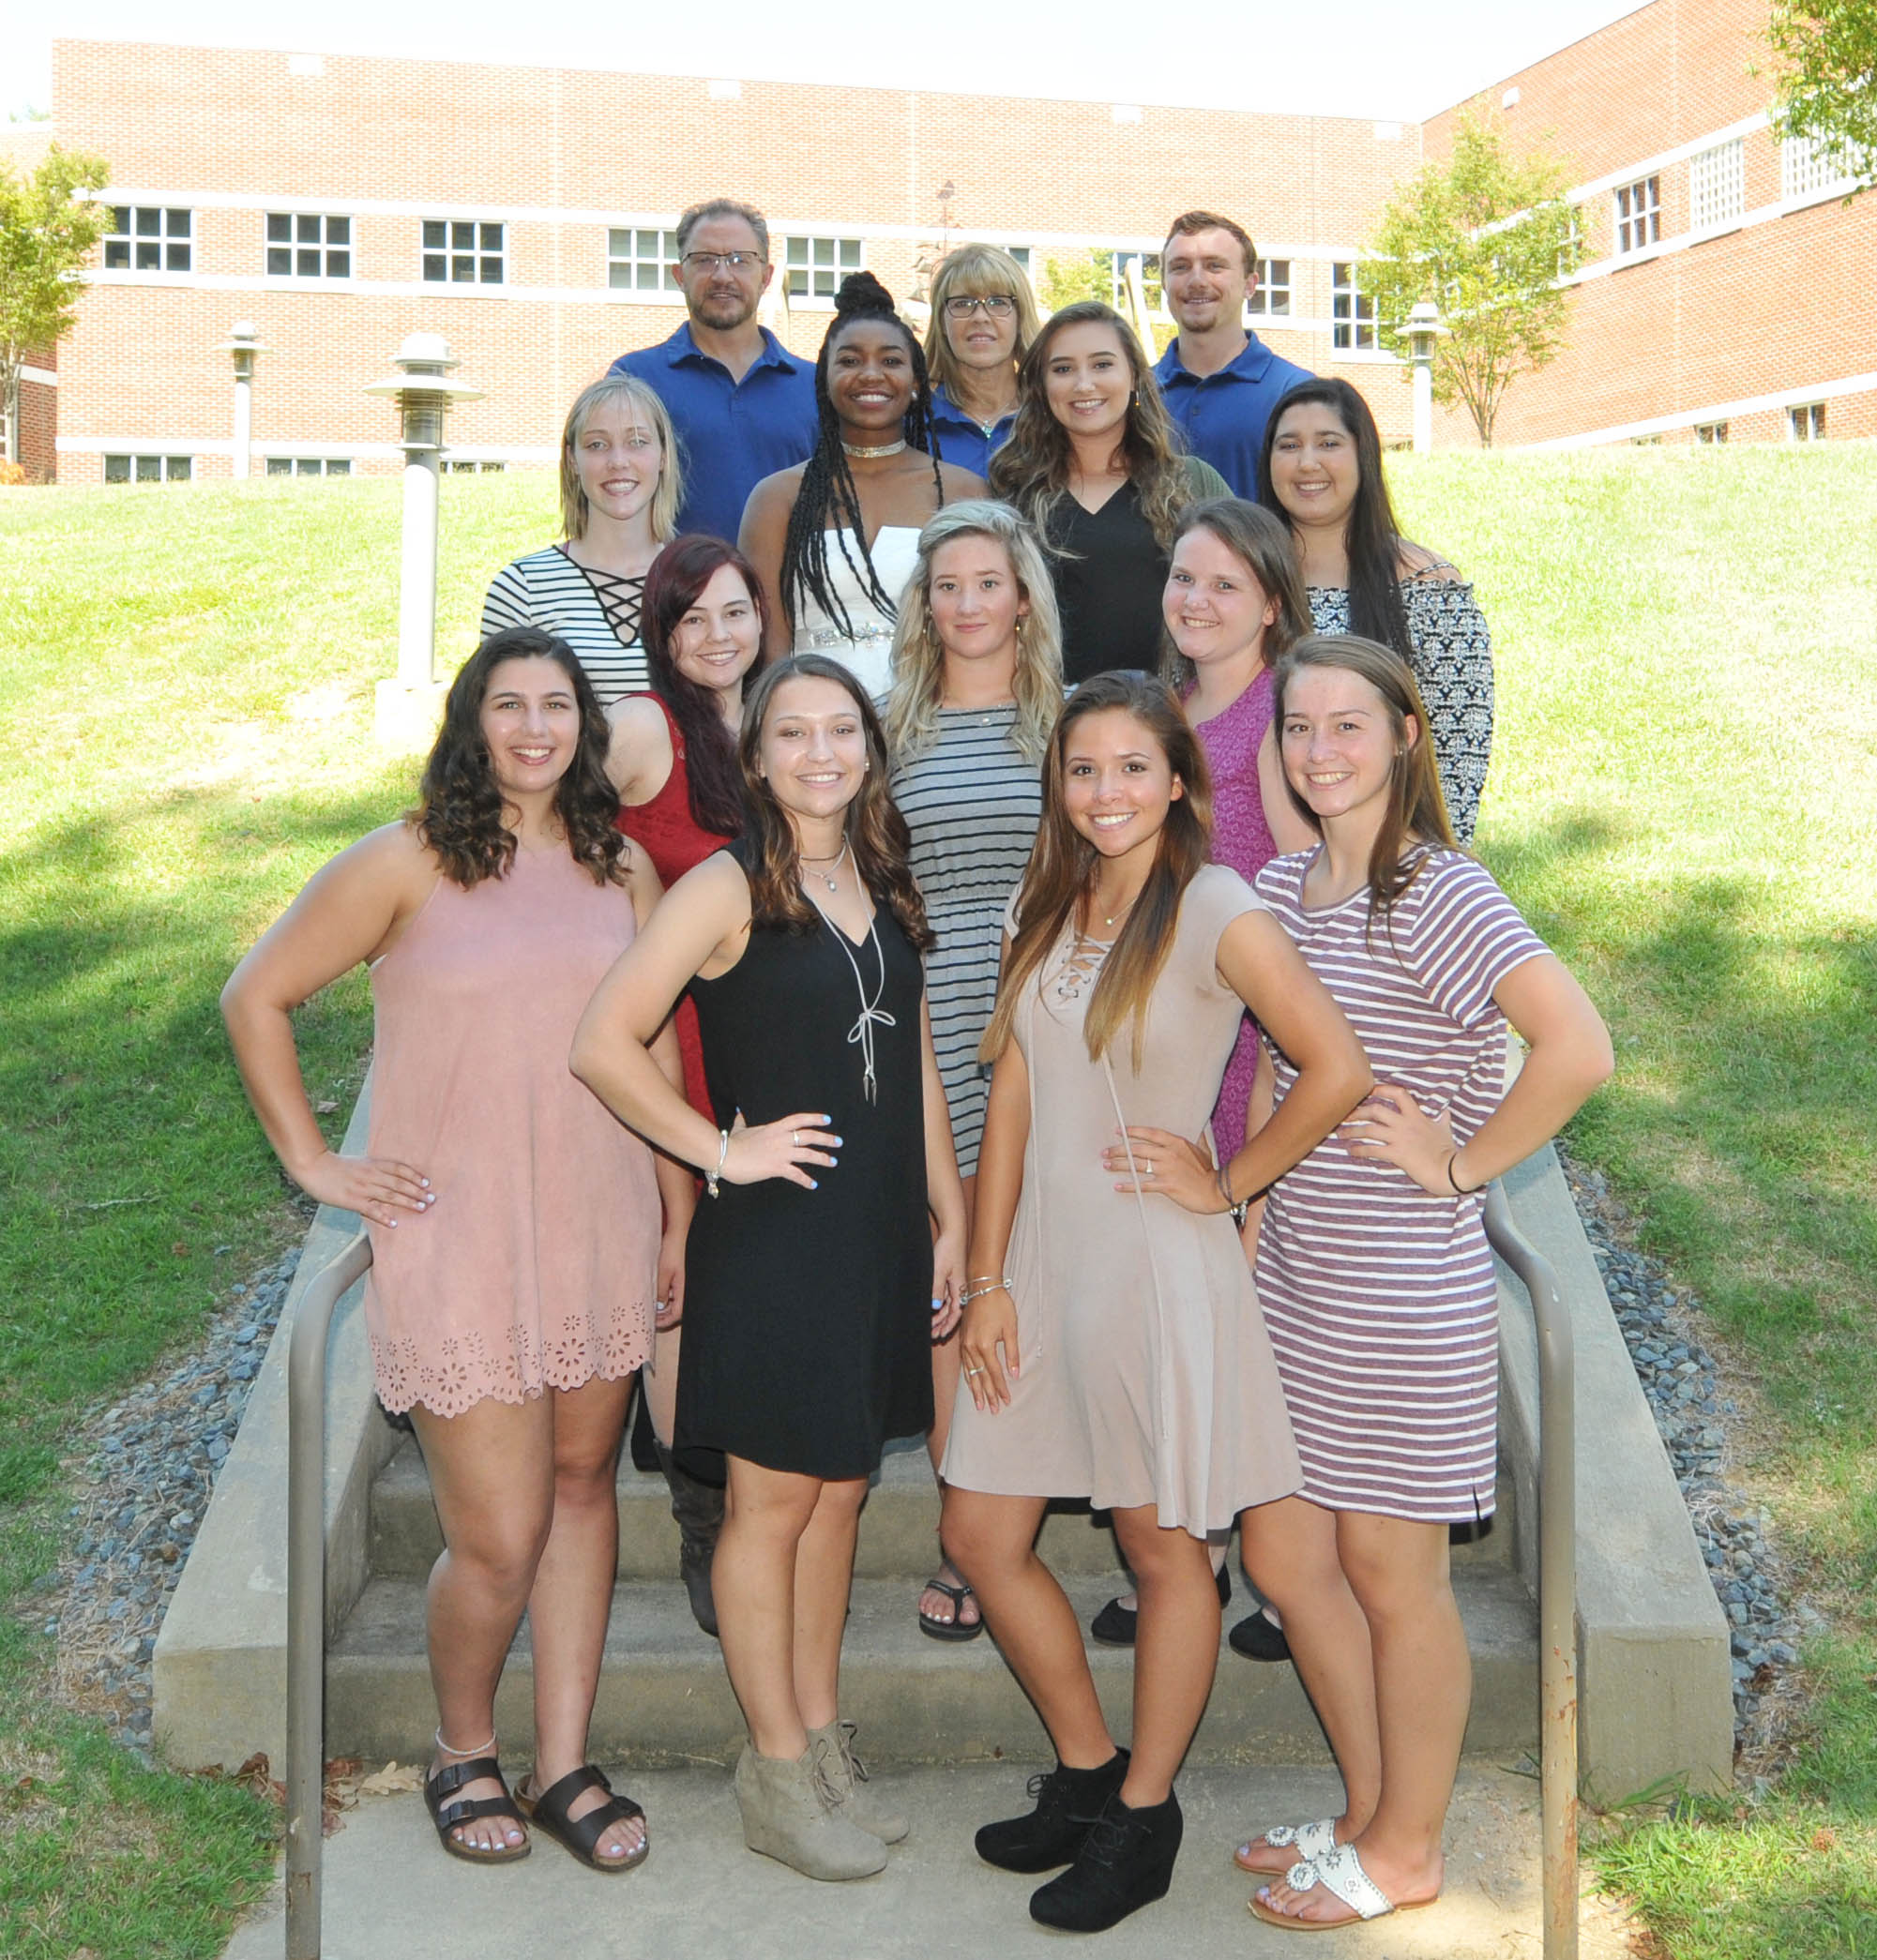 Click to enlarge,  The 2017 Central Carolina Community College volleyball team is pictured, left to right: front row, Alexis Harrigan, Tara Way, Alexis Mackenzie, and Elissa Neal; second row, Samantha Denison, Brooke Young, and Emma Cowfer; third row, Katelyn Carroll, Khazhay Bowman, Spencer Thompson, and Skylar Whitton; back row, Coaches Bill Carter, Tami Carter, and William Carter. 